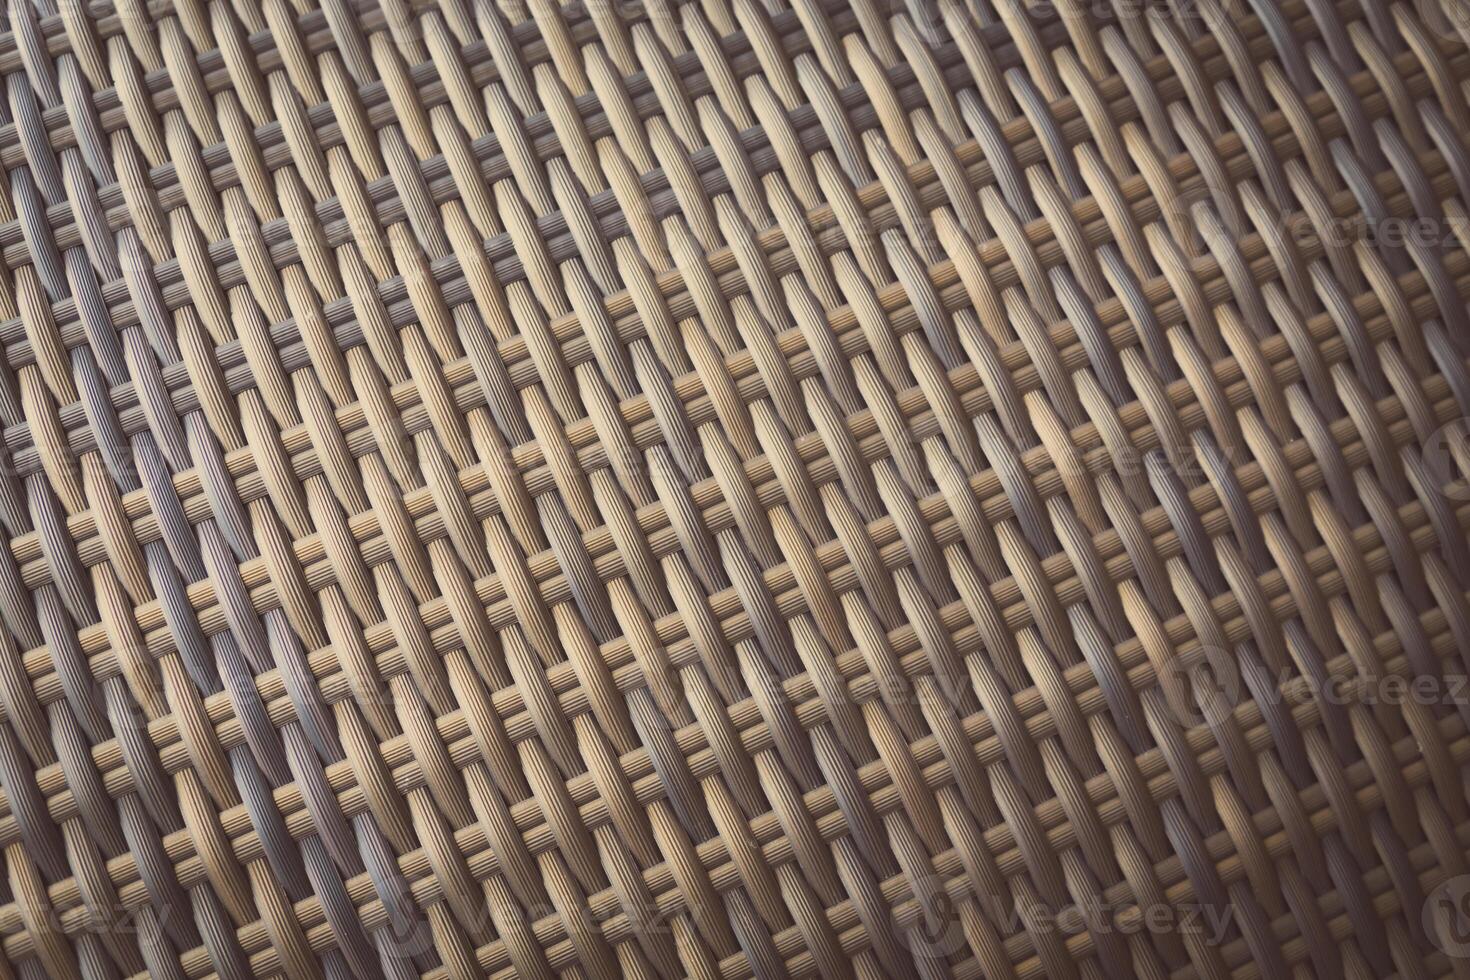 Synthetic rattan texture weaving background as used on outdoor garden furniture. photo